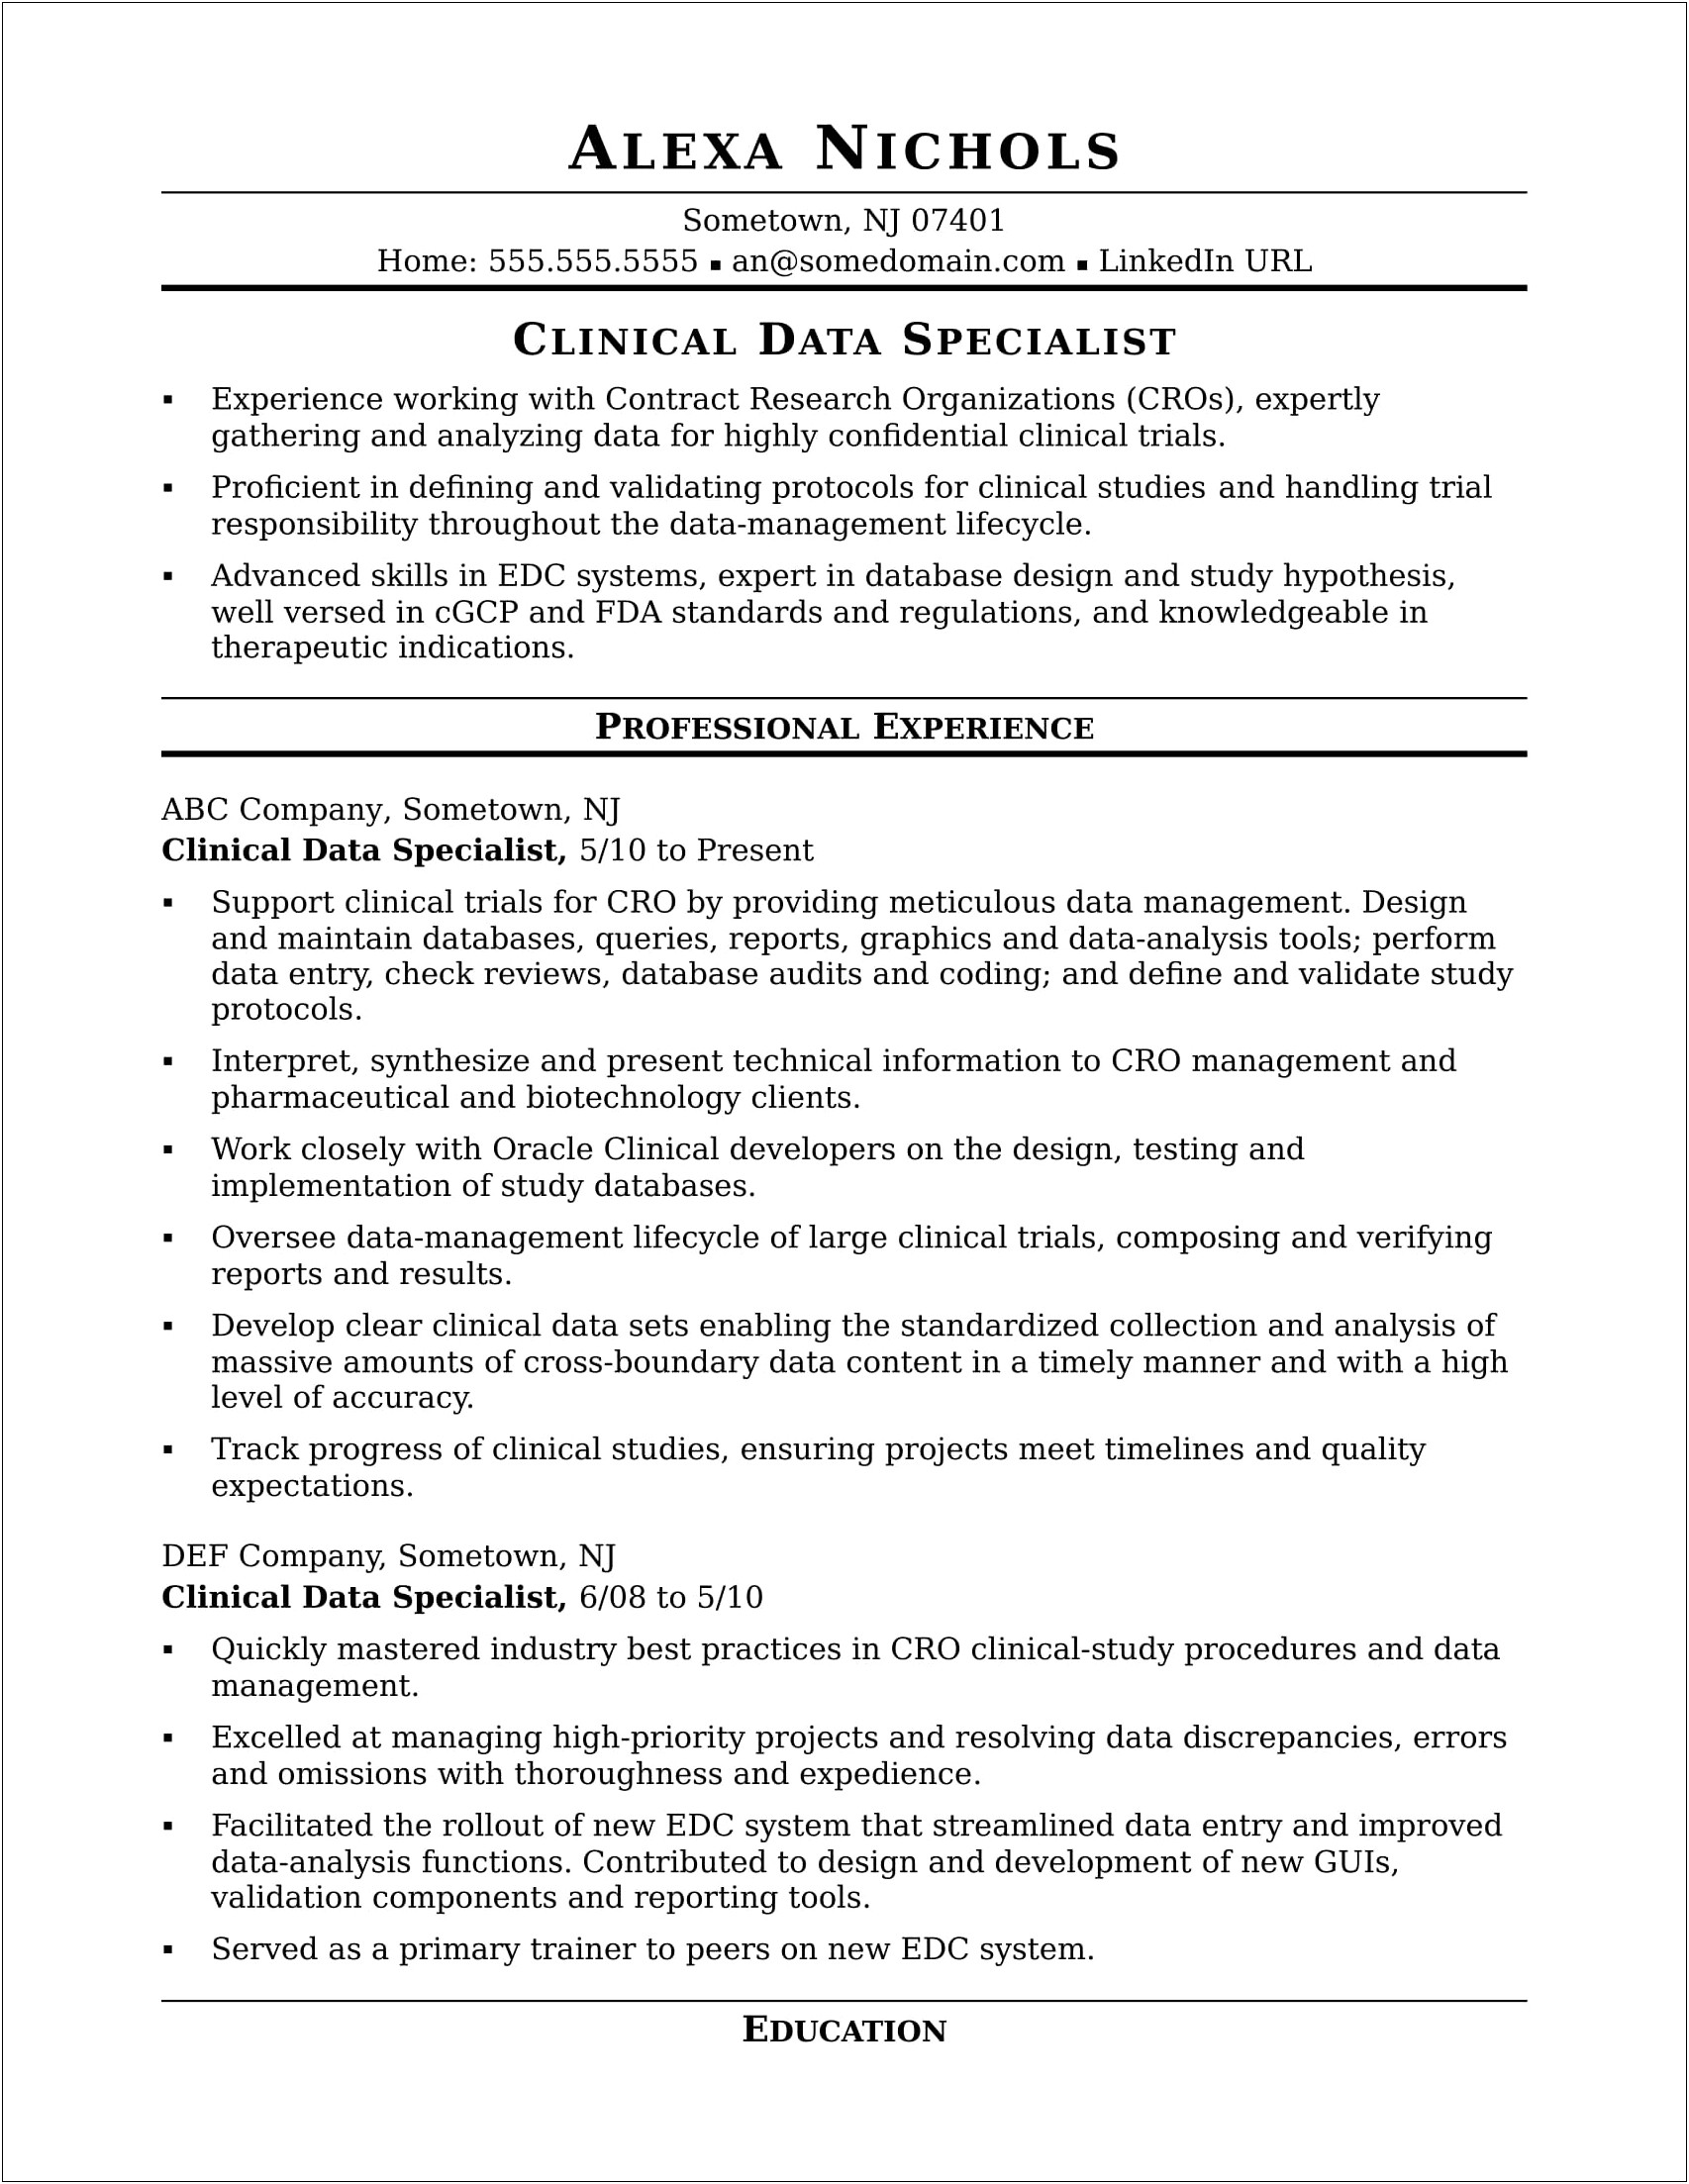 Clinical Sas Resumes For 2 Years Experience